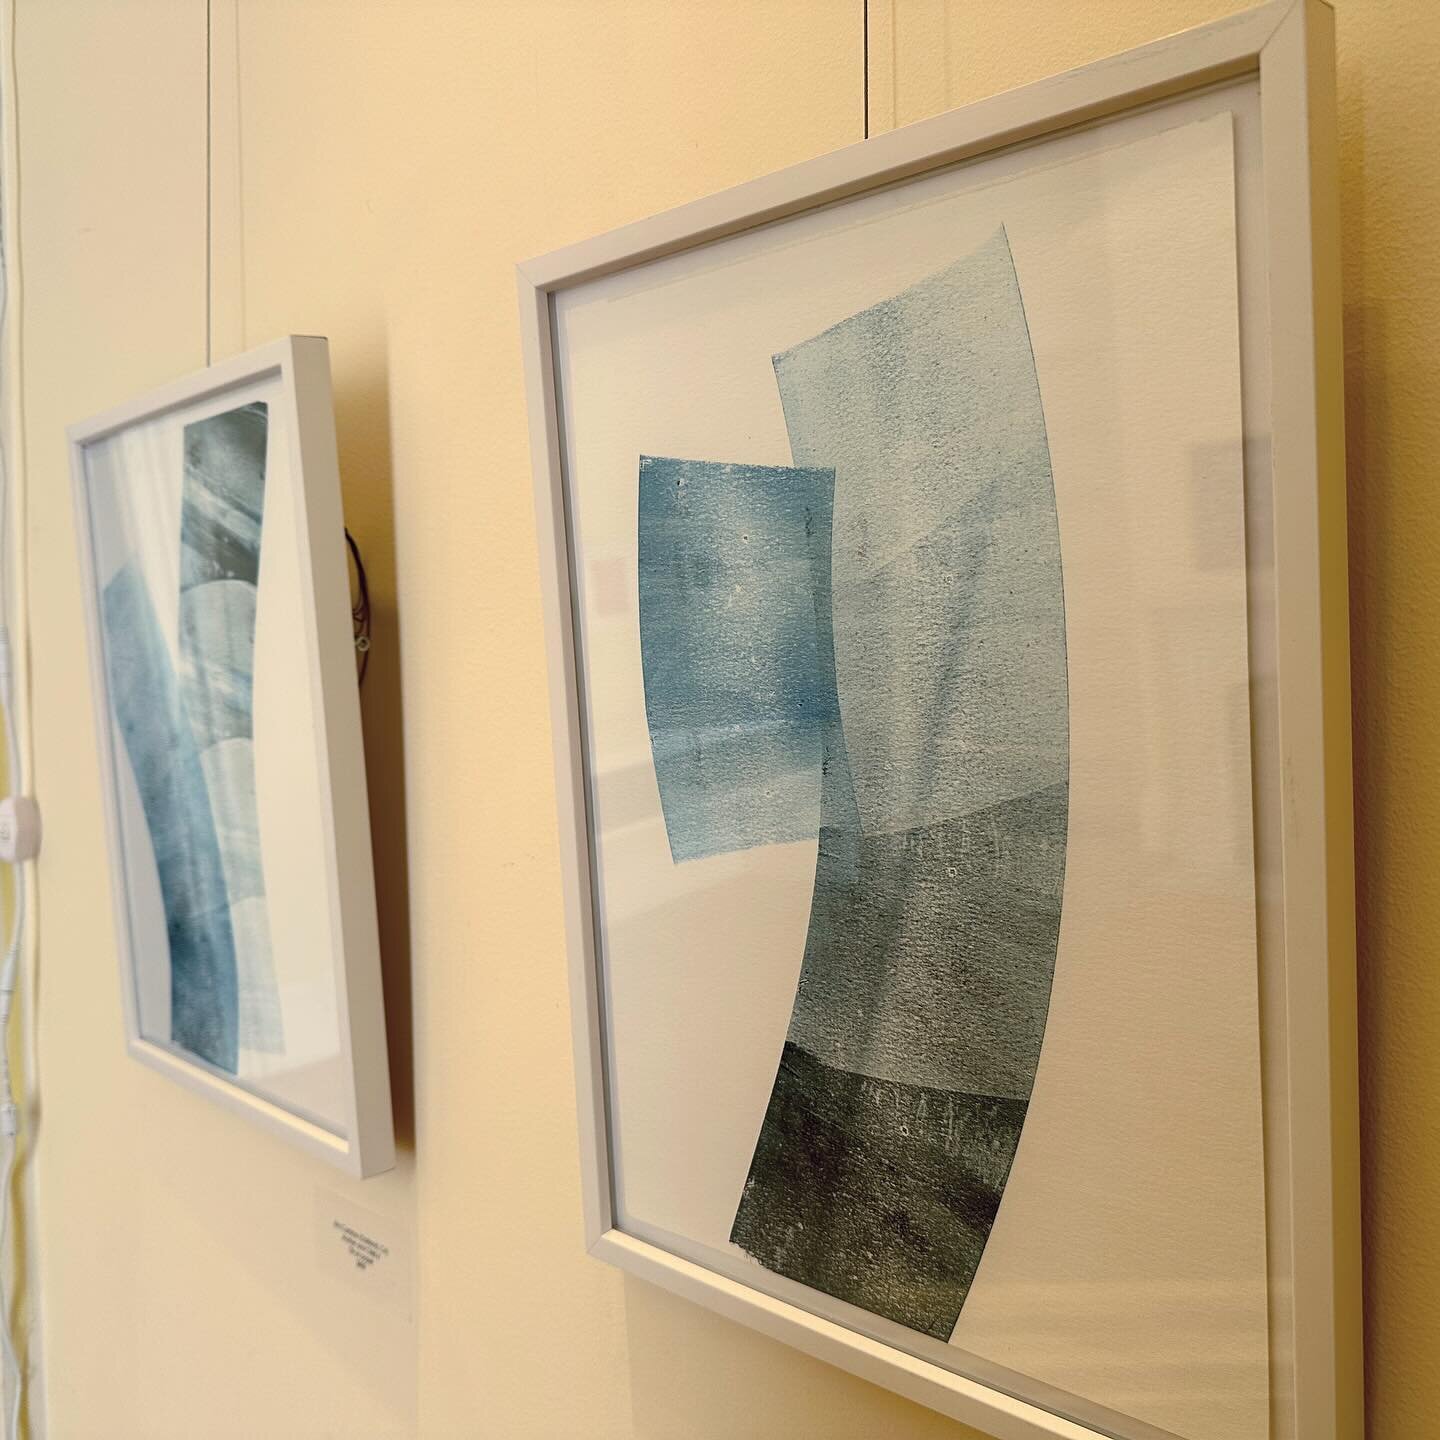 Explorations in Monochromatic Art is @artsbenicia for three more weeks. Go see this show juried by @leahmartharosenberg not only because the work is great, but also because the historic building is gorgeous and the town is cute! If you can't get out 